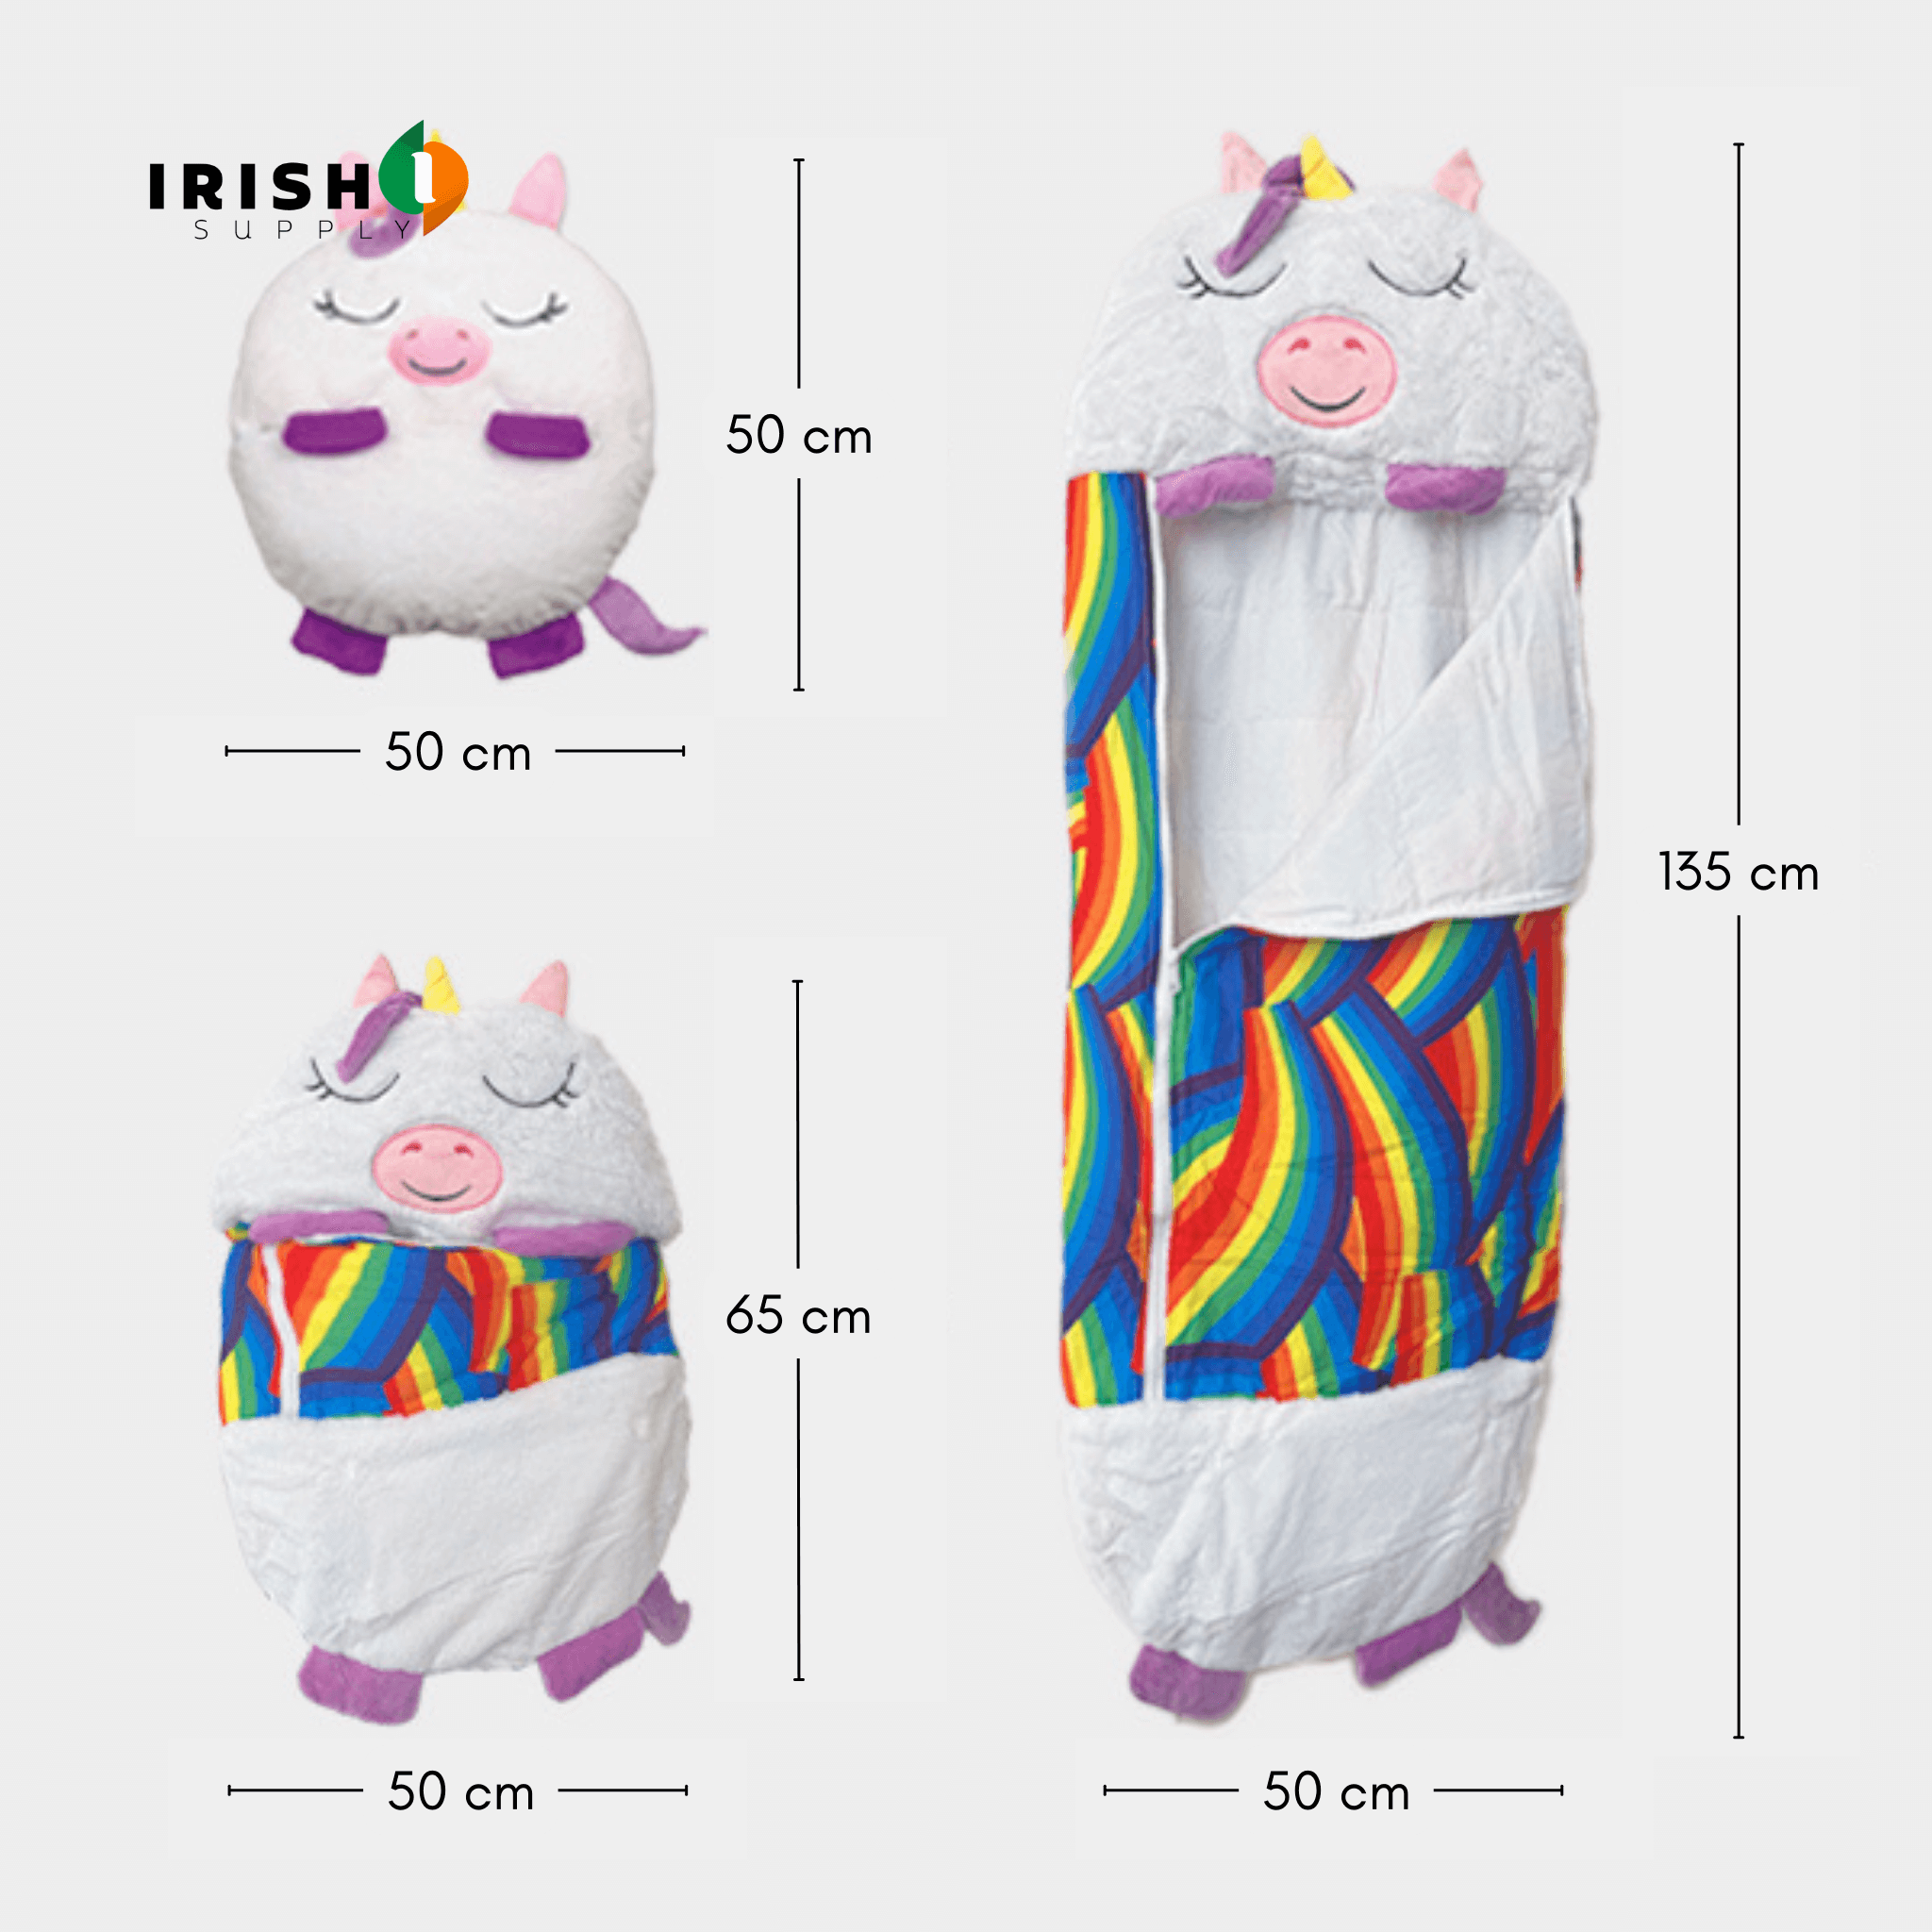 COCOONAP Plush Doll Sleeping Sack with Pillow